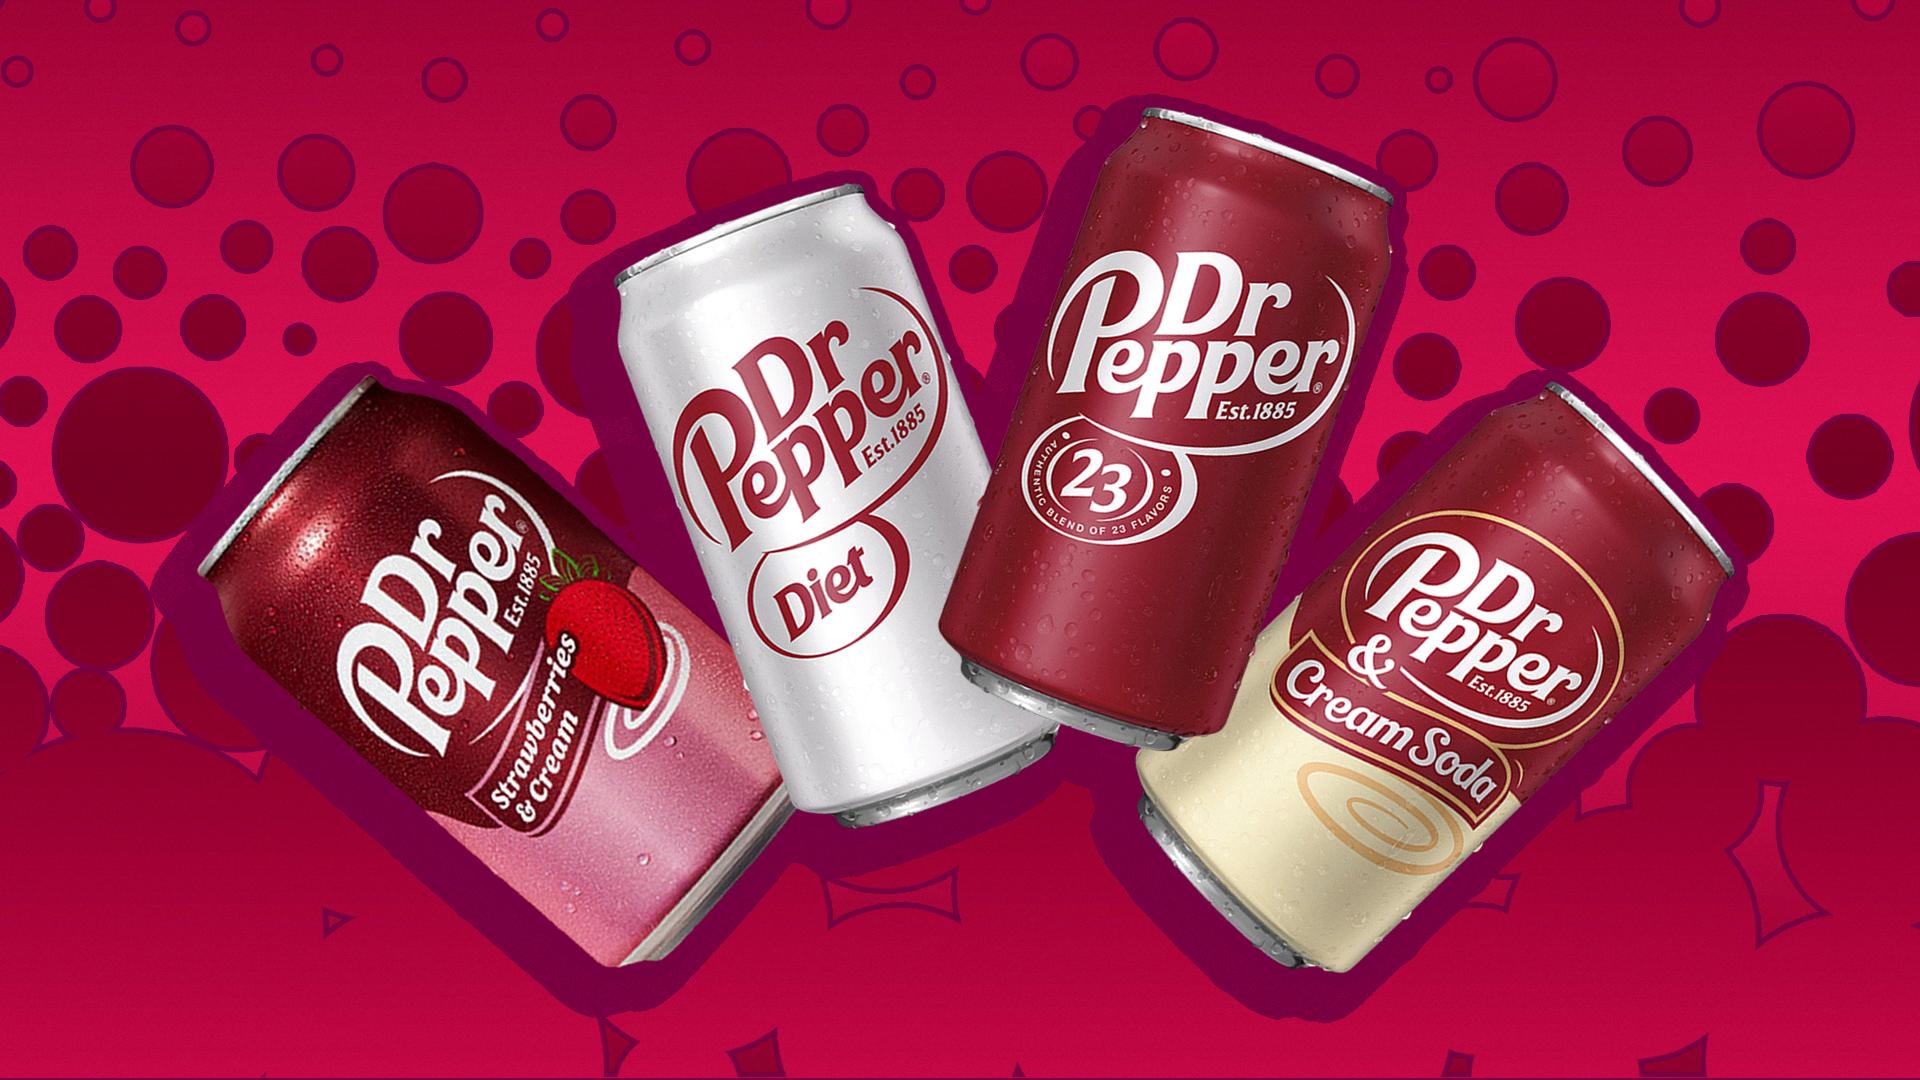 flavors in dr pepper